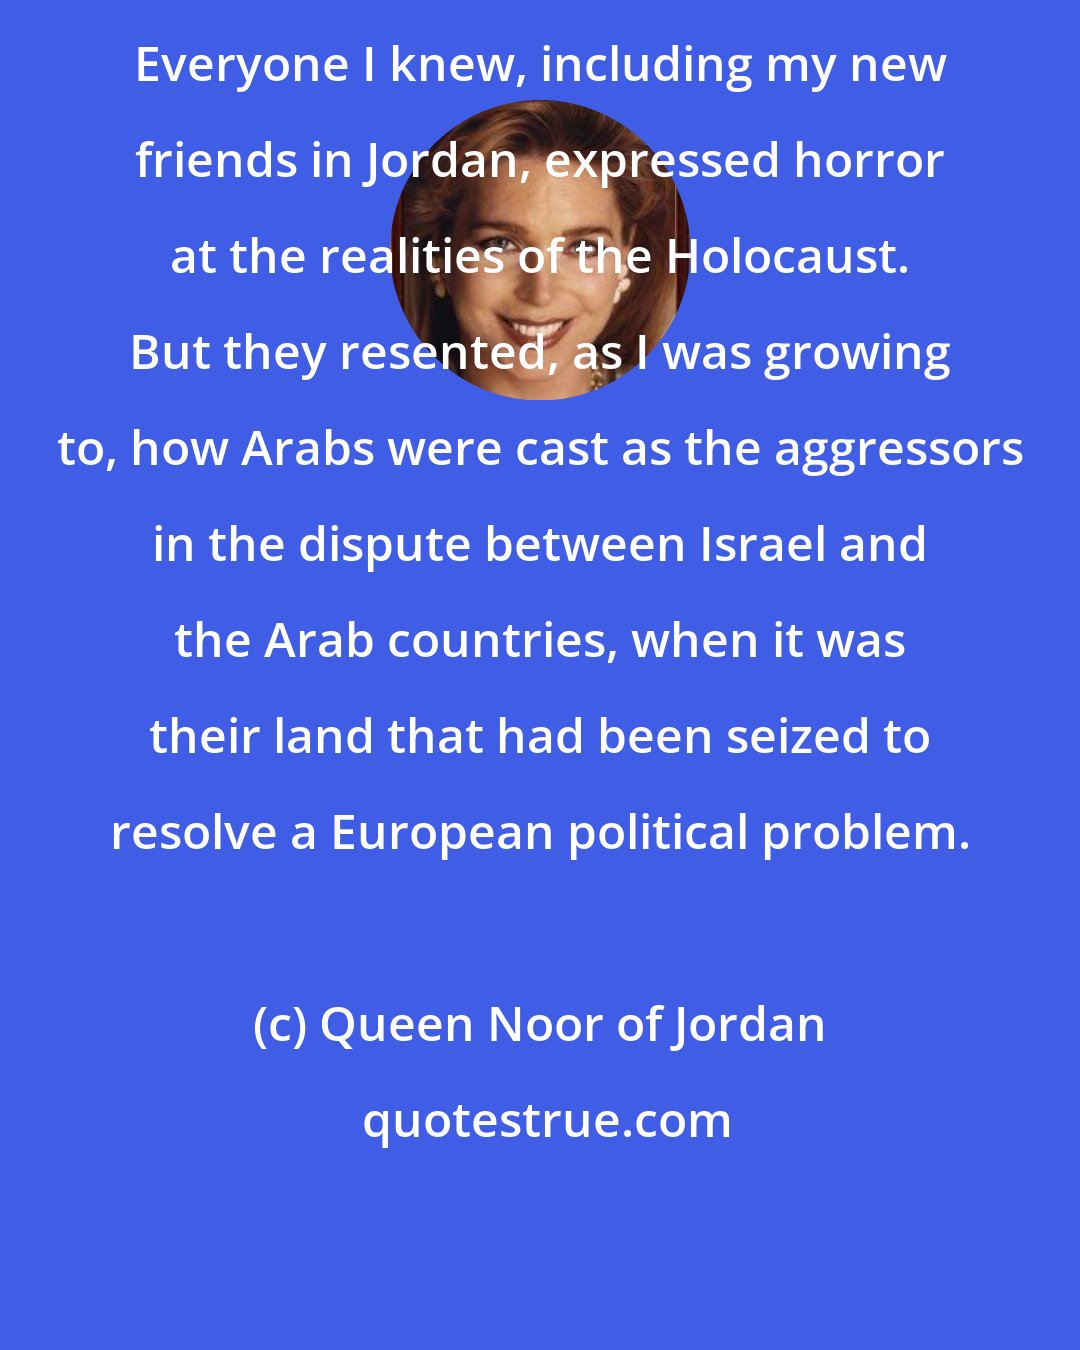 Queen Noor of Jordan: Everyone I knew, including my new friends in Jordan, expressed horror at the realities of the Holocaust. But they resented, as I was growing to, how Arabs were cast as the aggressors in the dispute between Israel and the Arab countries, when it was their land that had been seized to resolve a European political problem.